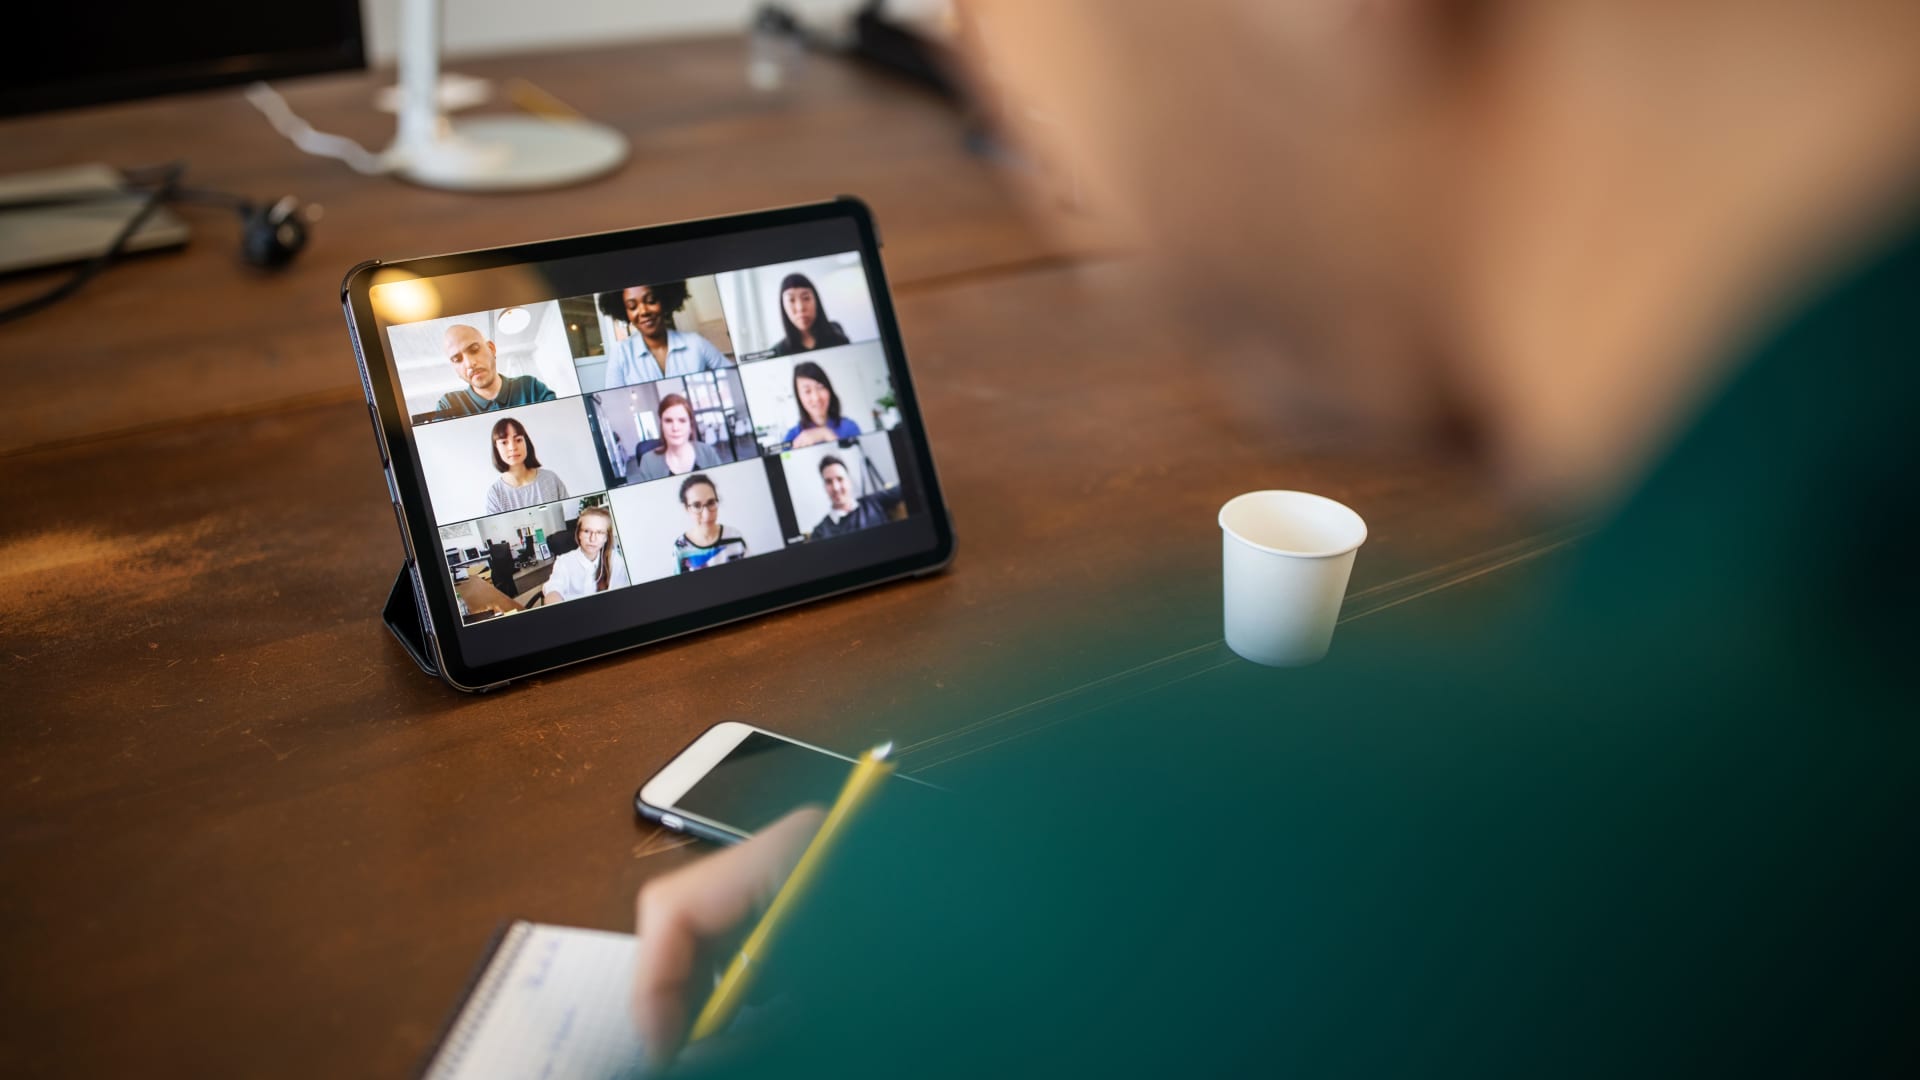 5 Simple Rules to Keep an All-Hands Virtual Meeting From Becoming a Disaster